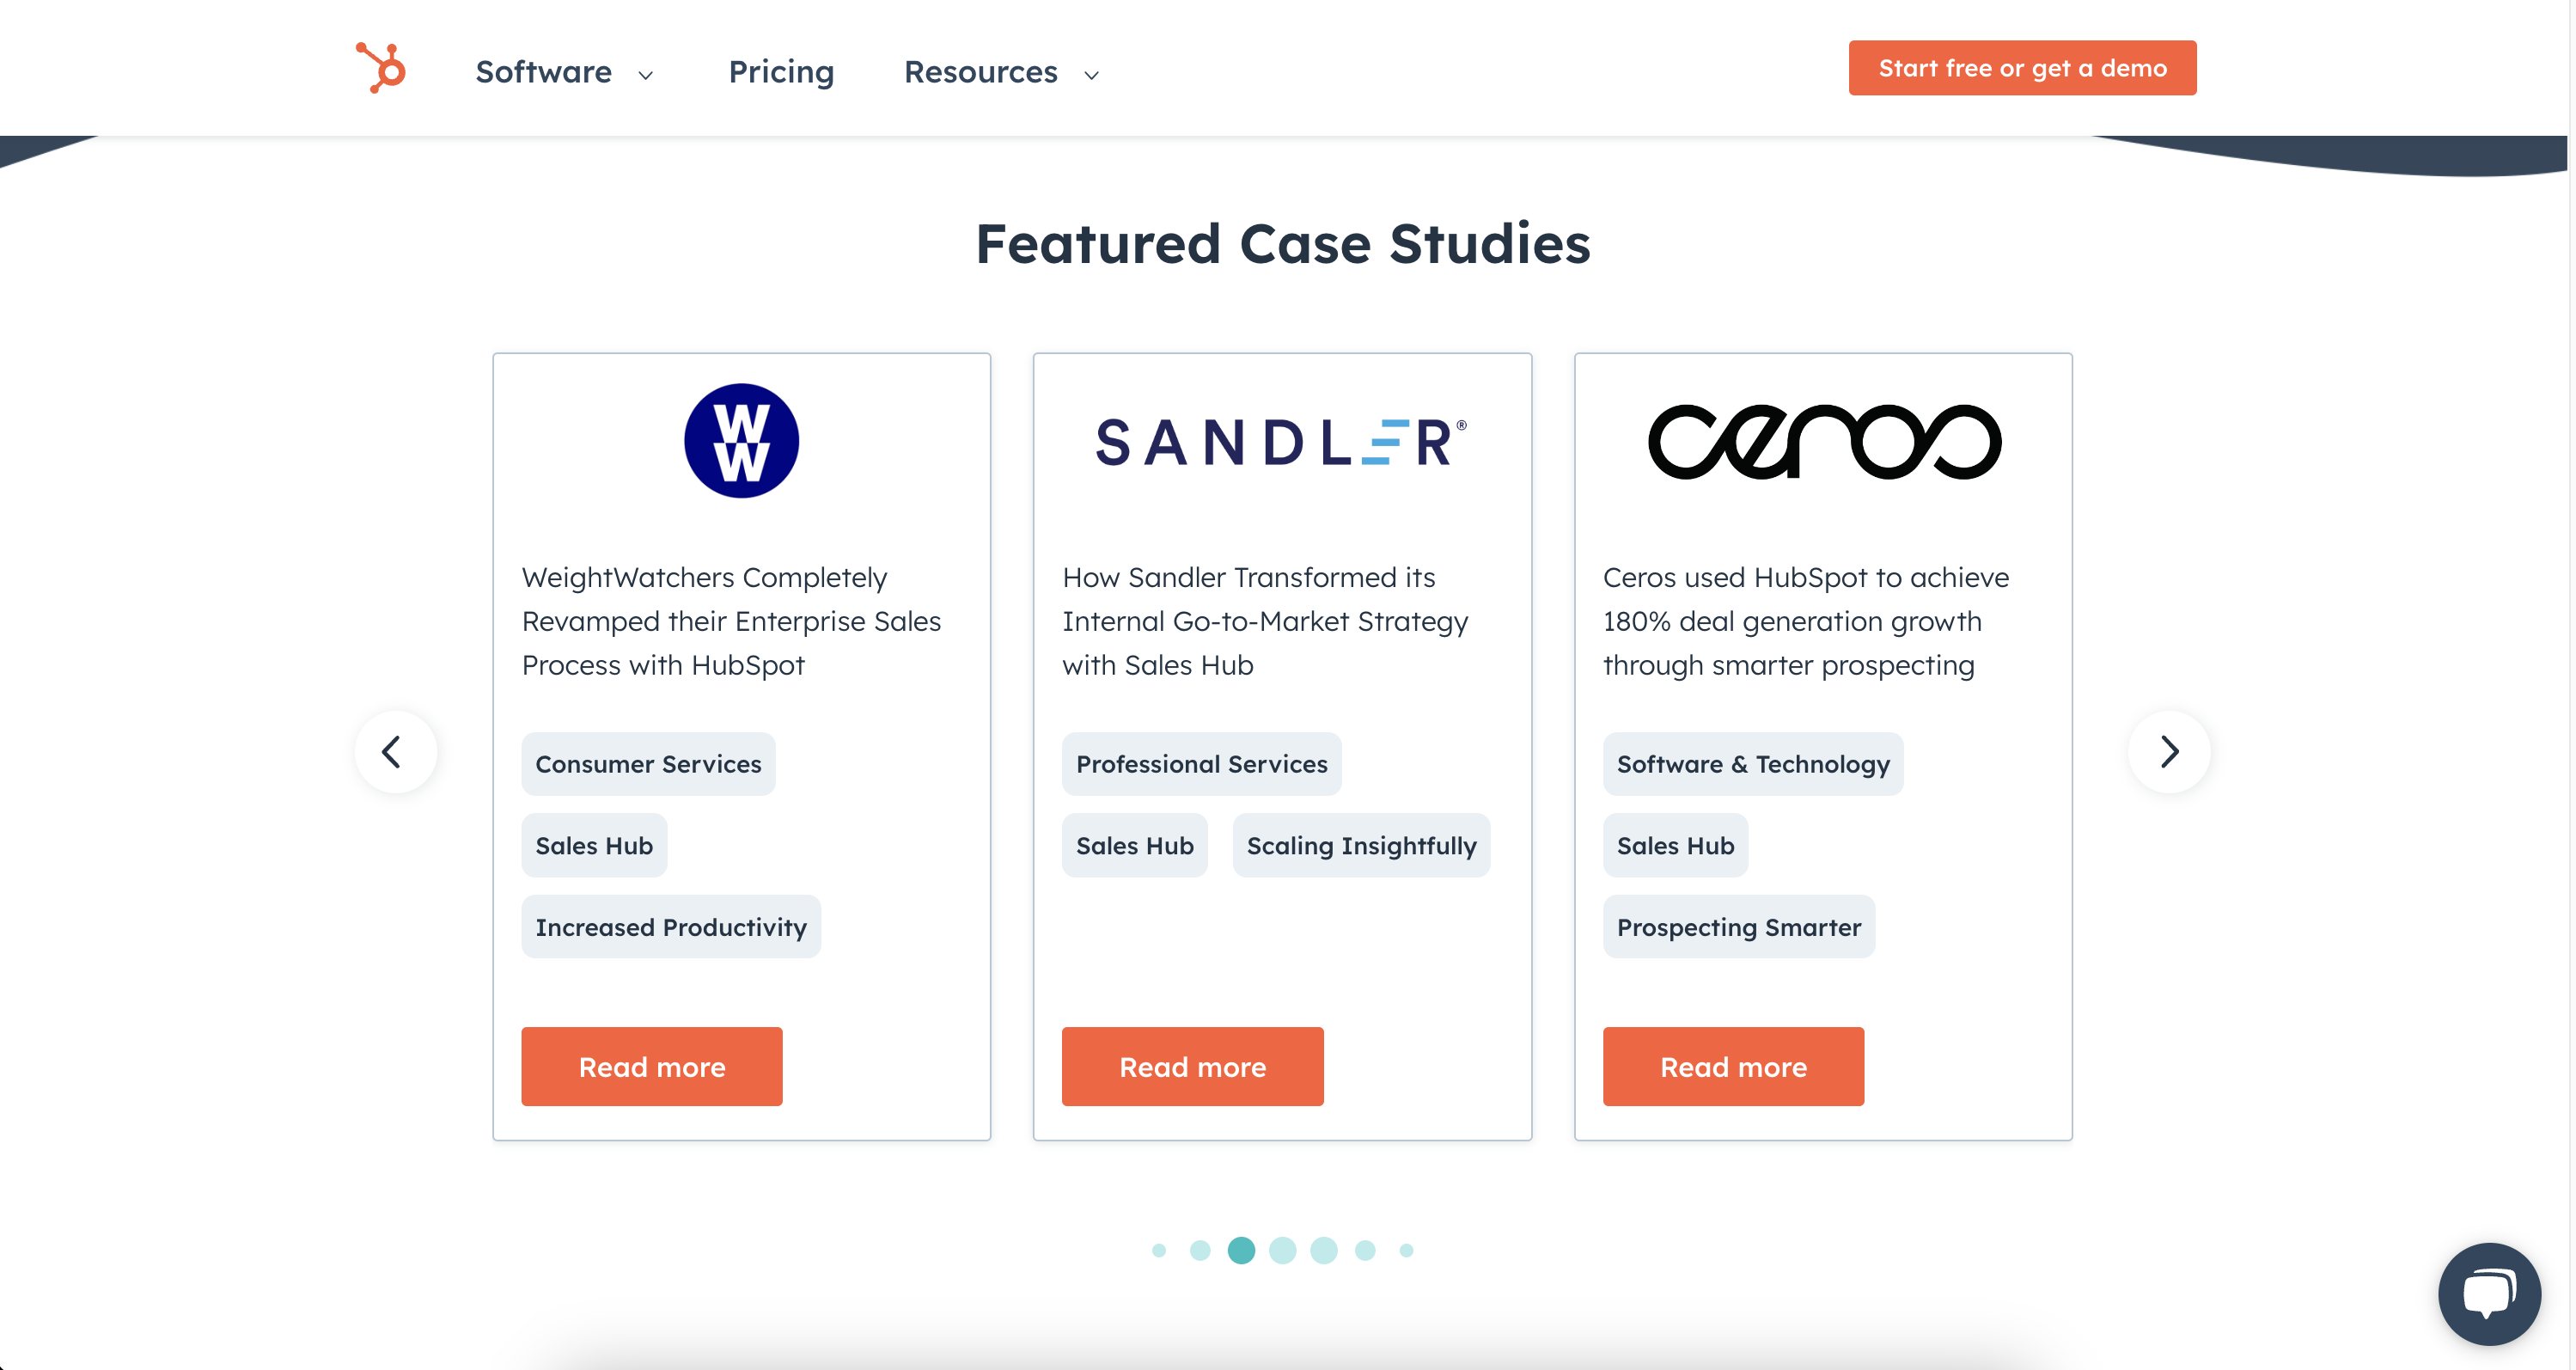 Analyze competitor's case studies to learn about their products' real impact